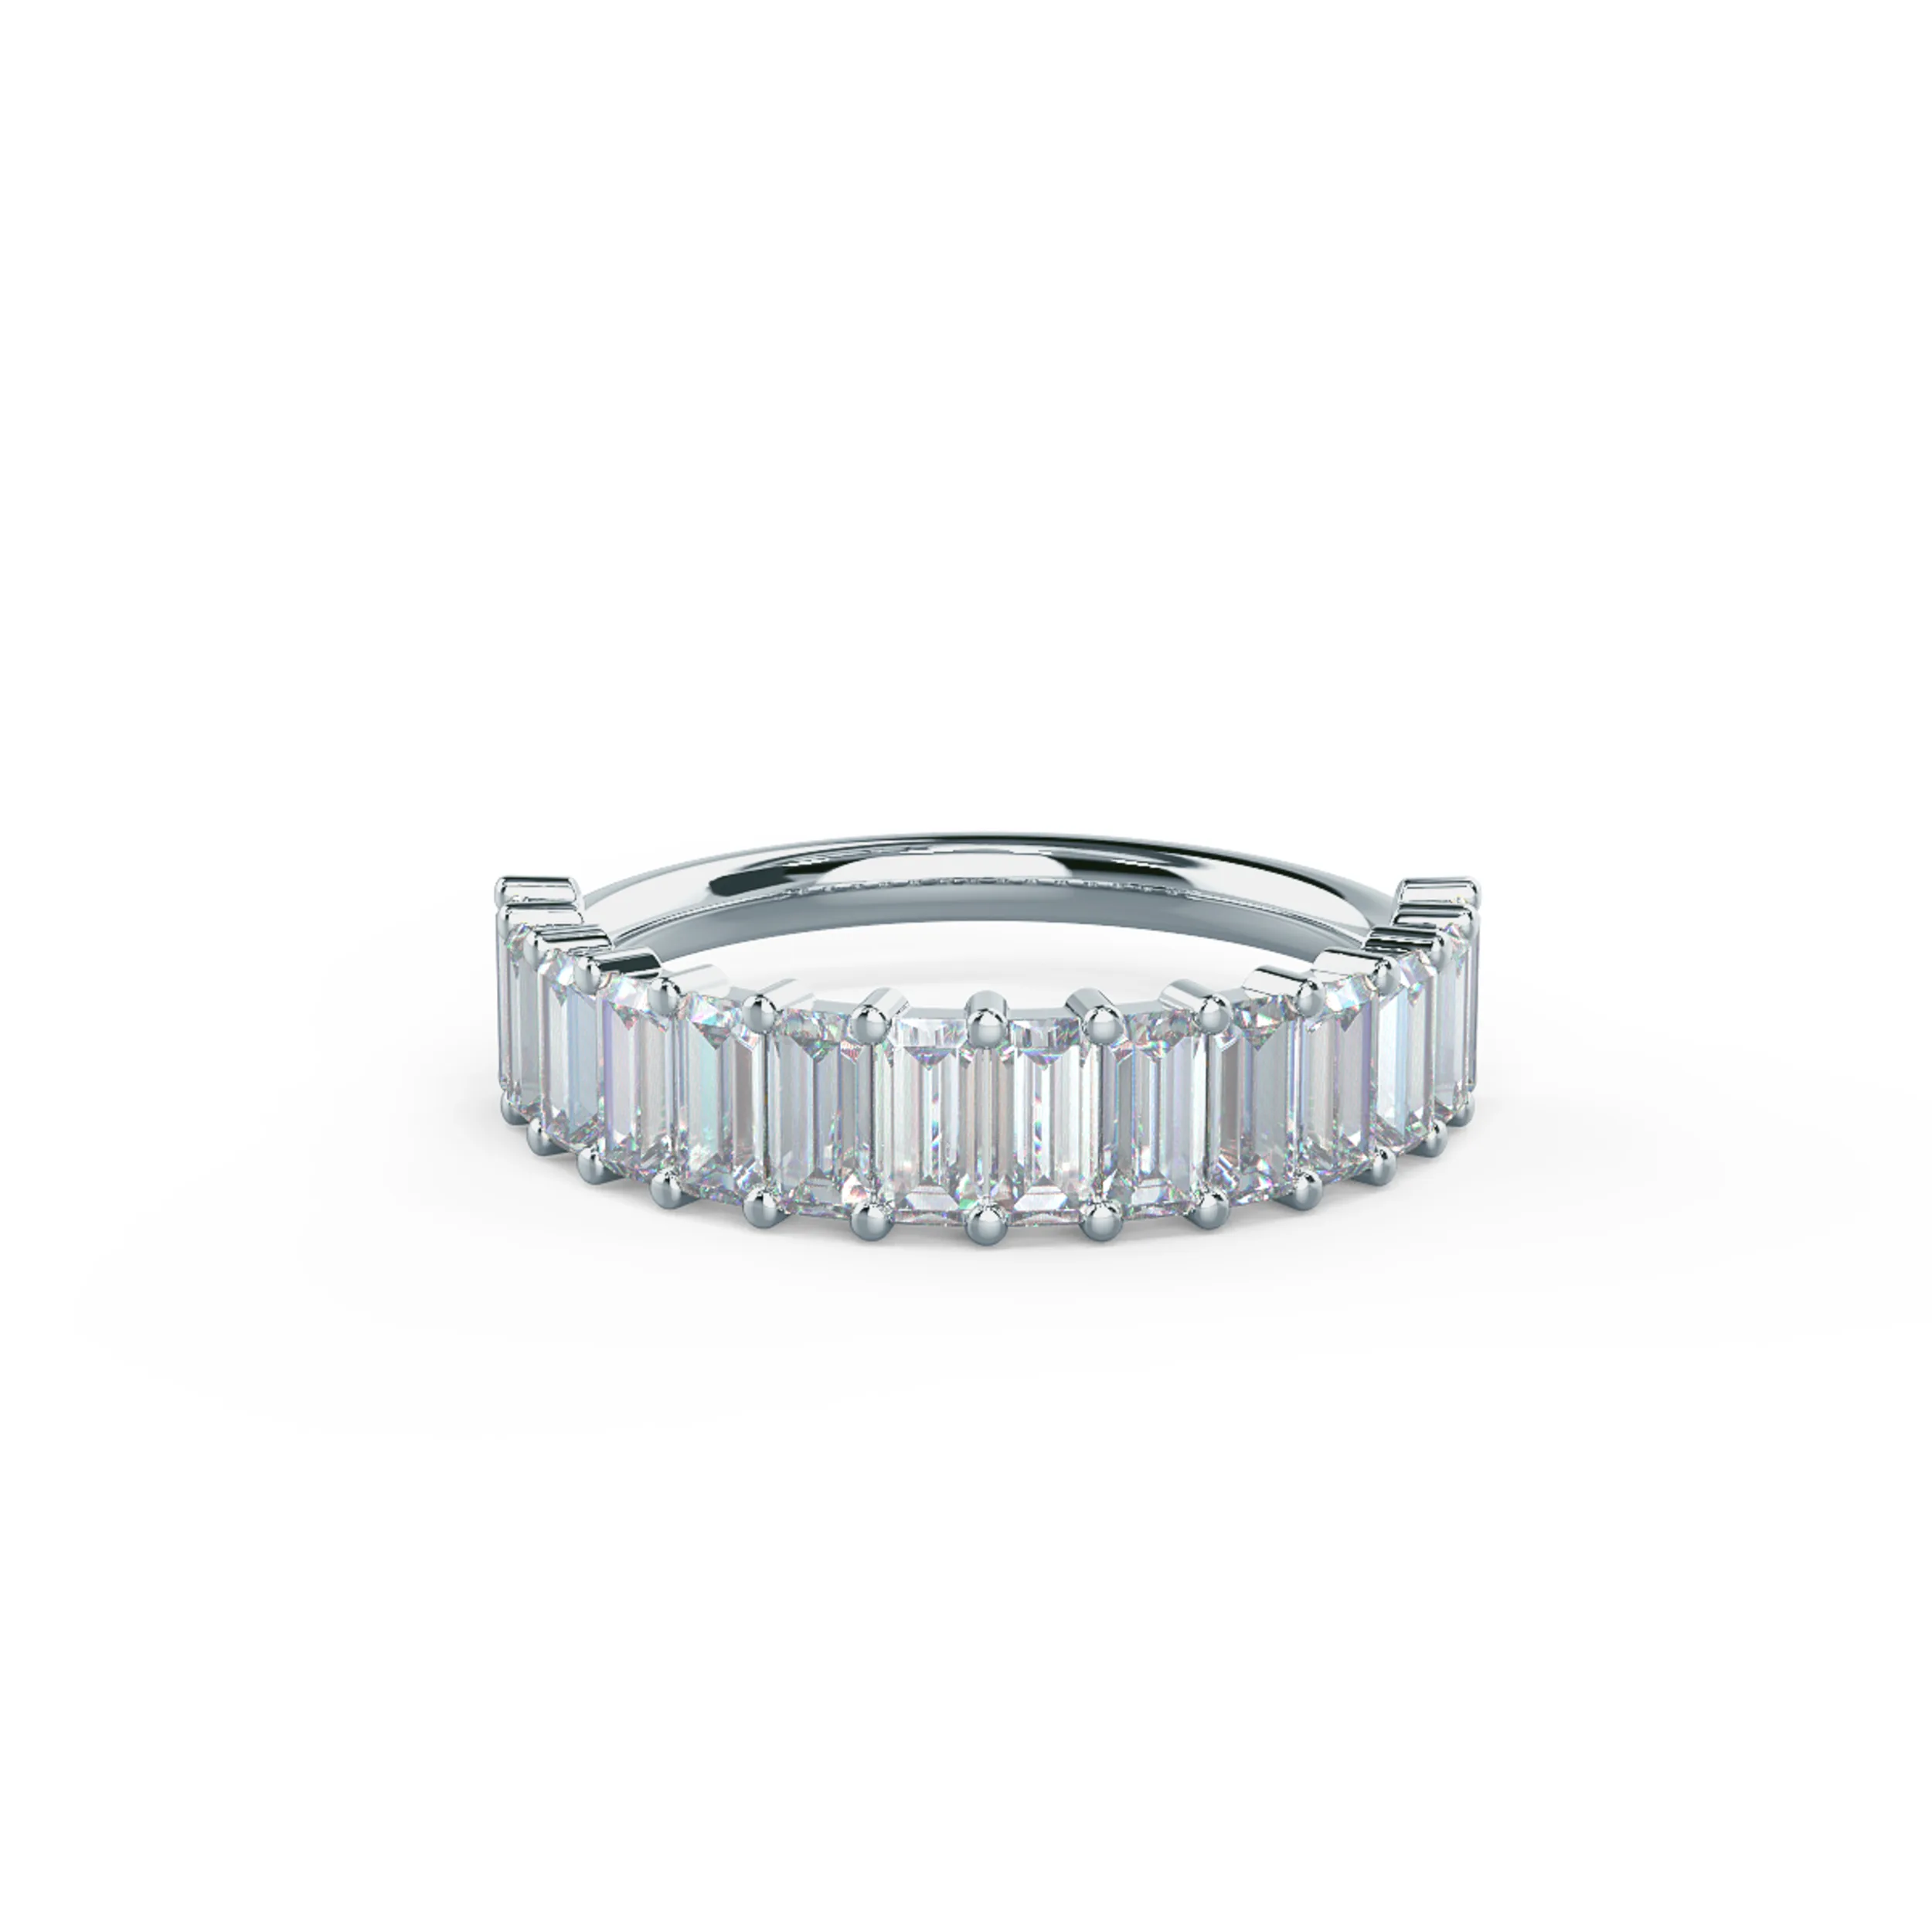 1.4 ct Man Made Diamonds set in 18k White Gold Baguette Half Band (Main View)